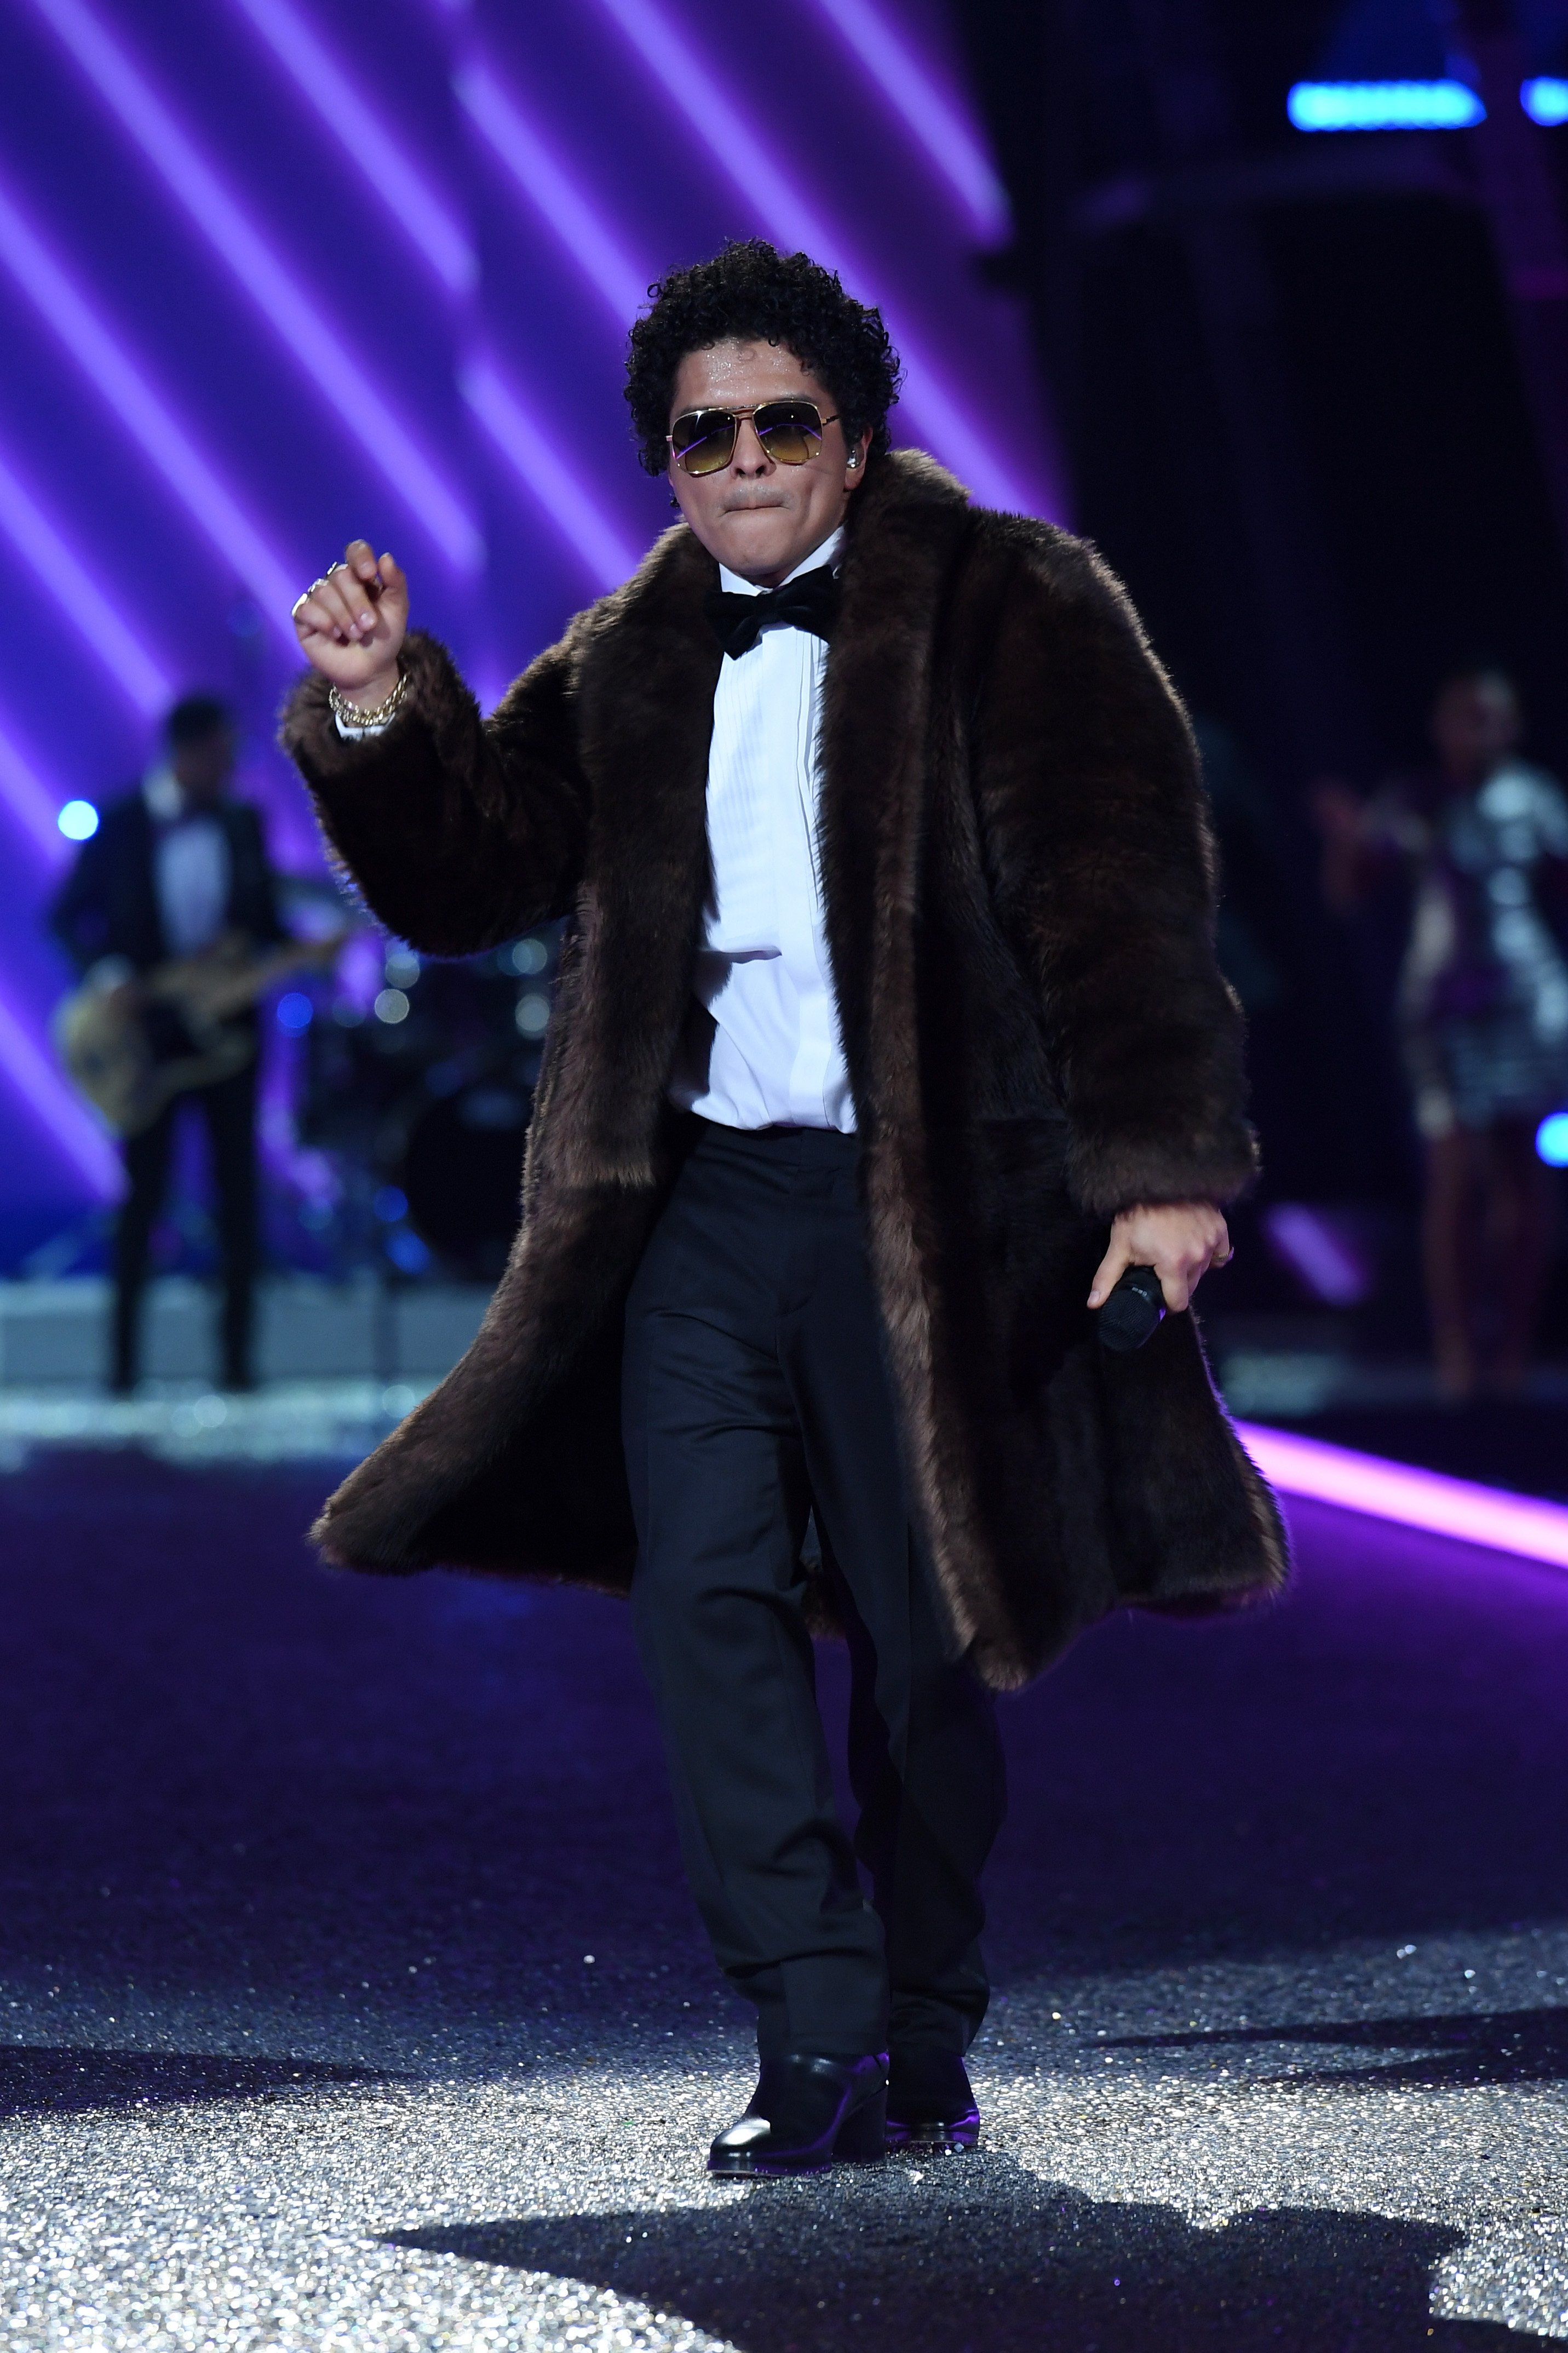 Bruno Mars performs on the runway during the 2016 Victoria's Secret Fashion Show on November 30, 2016 in Paris, France.